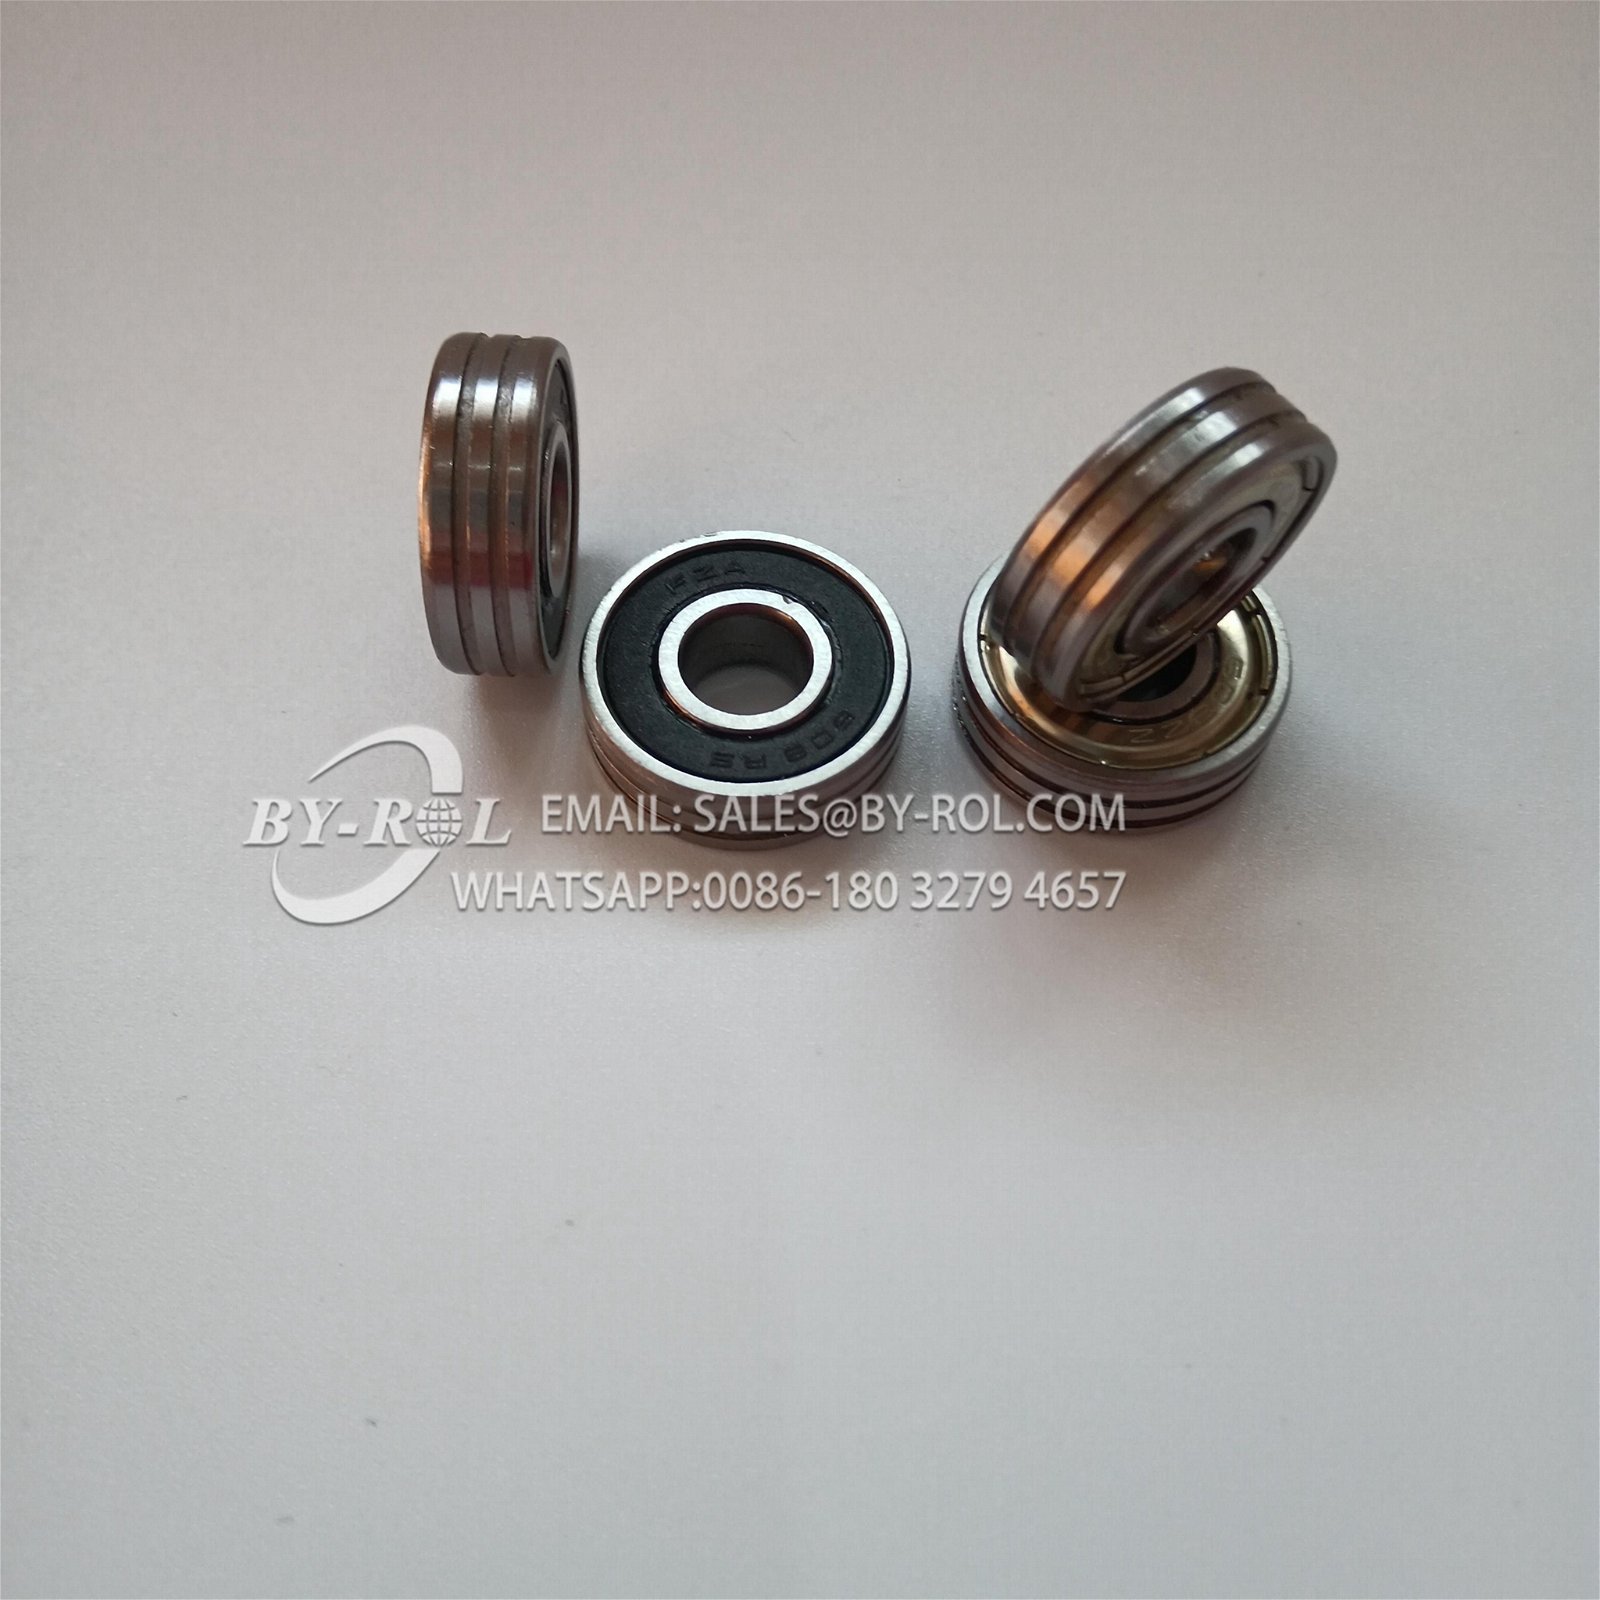 Roller Bearing 626zz 608zz RS with two cavaties/slots for plastic injection 2